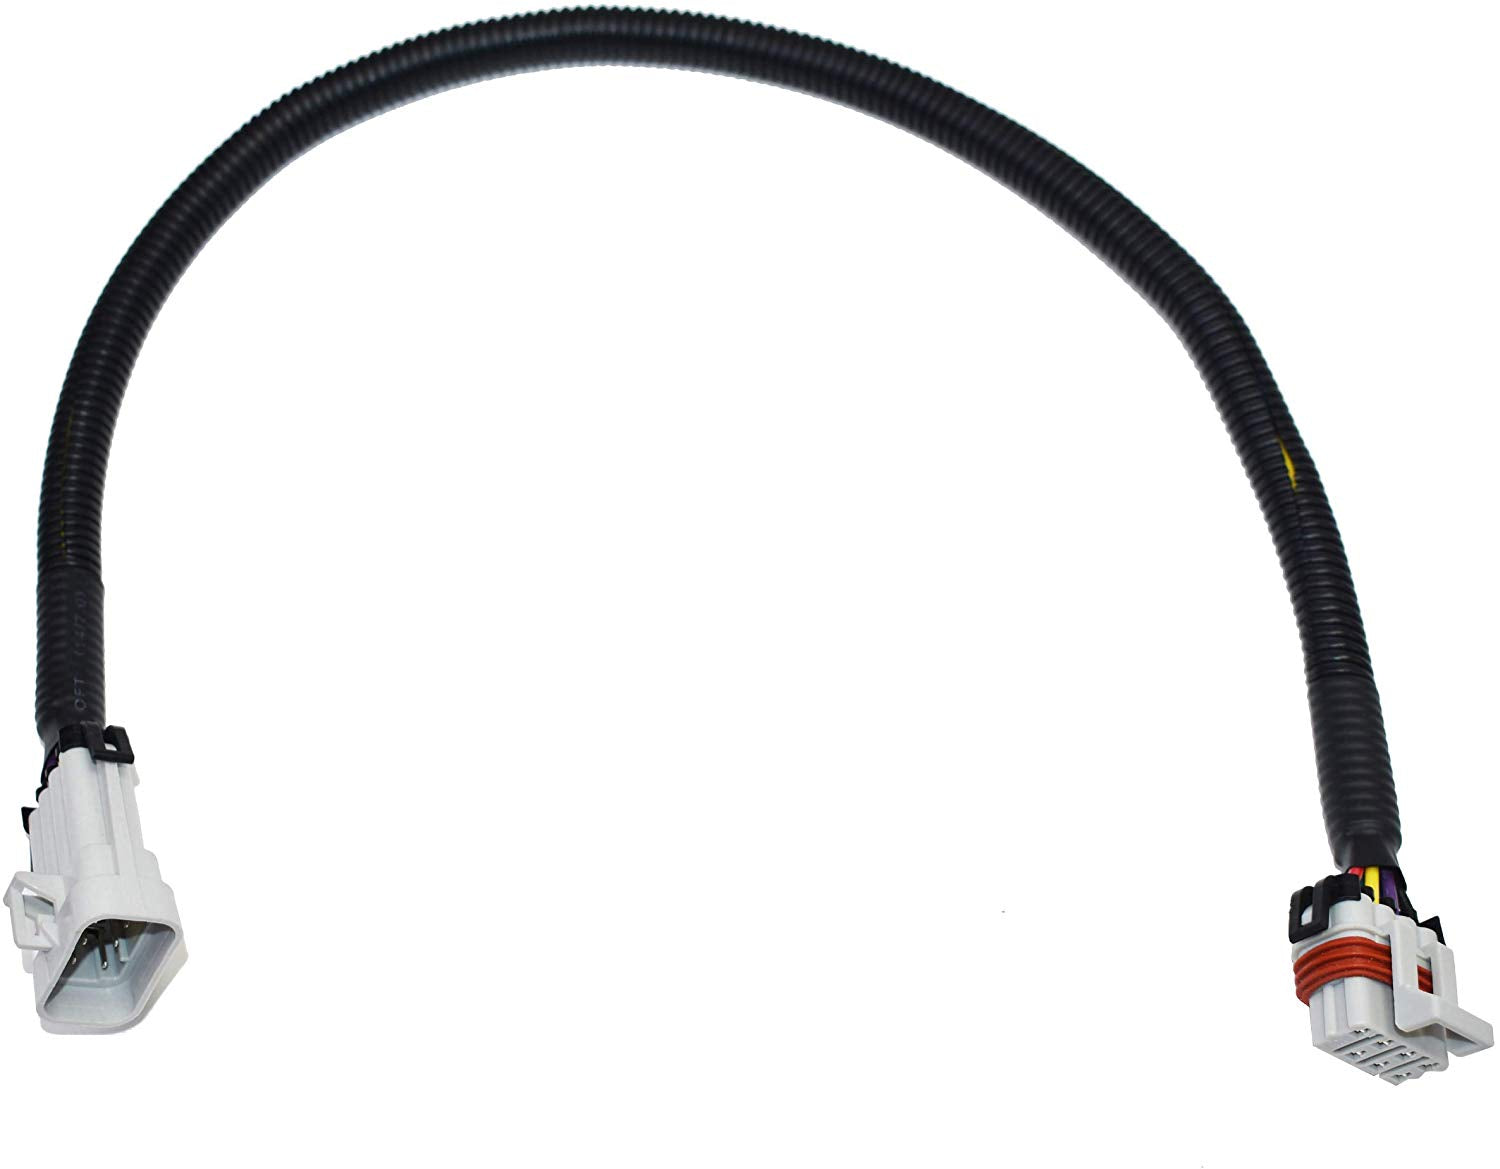 A-Team Performance LSX Ignition Coil Extension Wiring Harness 24